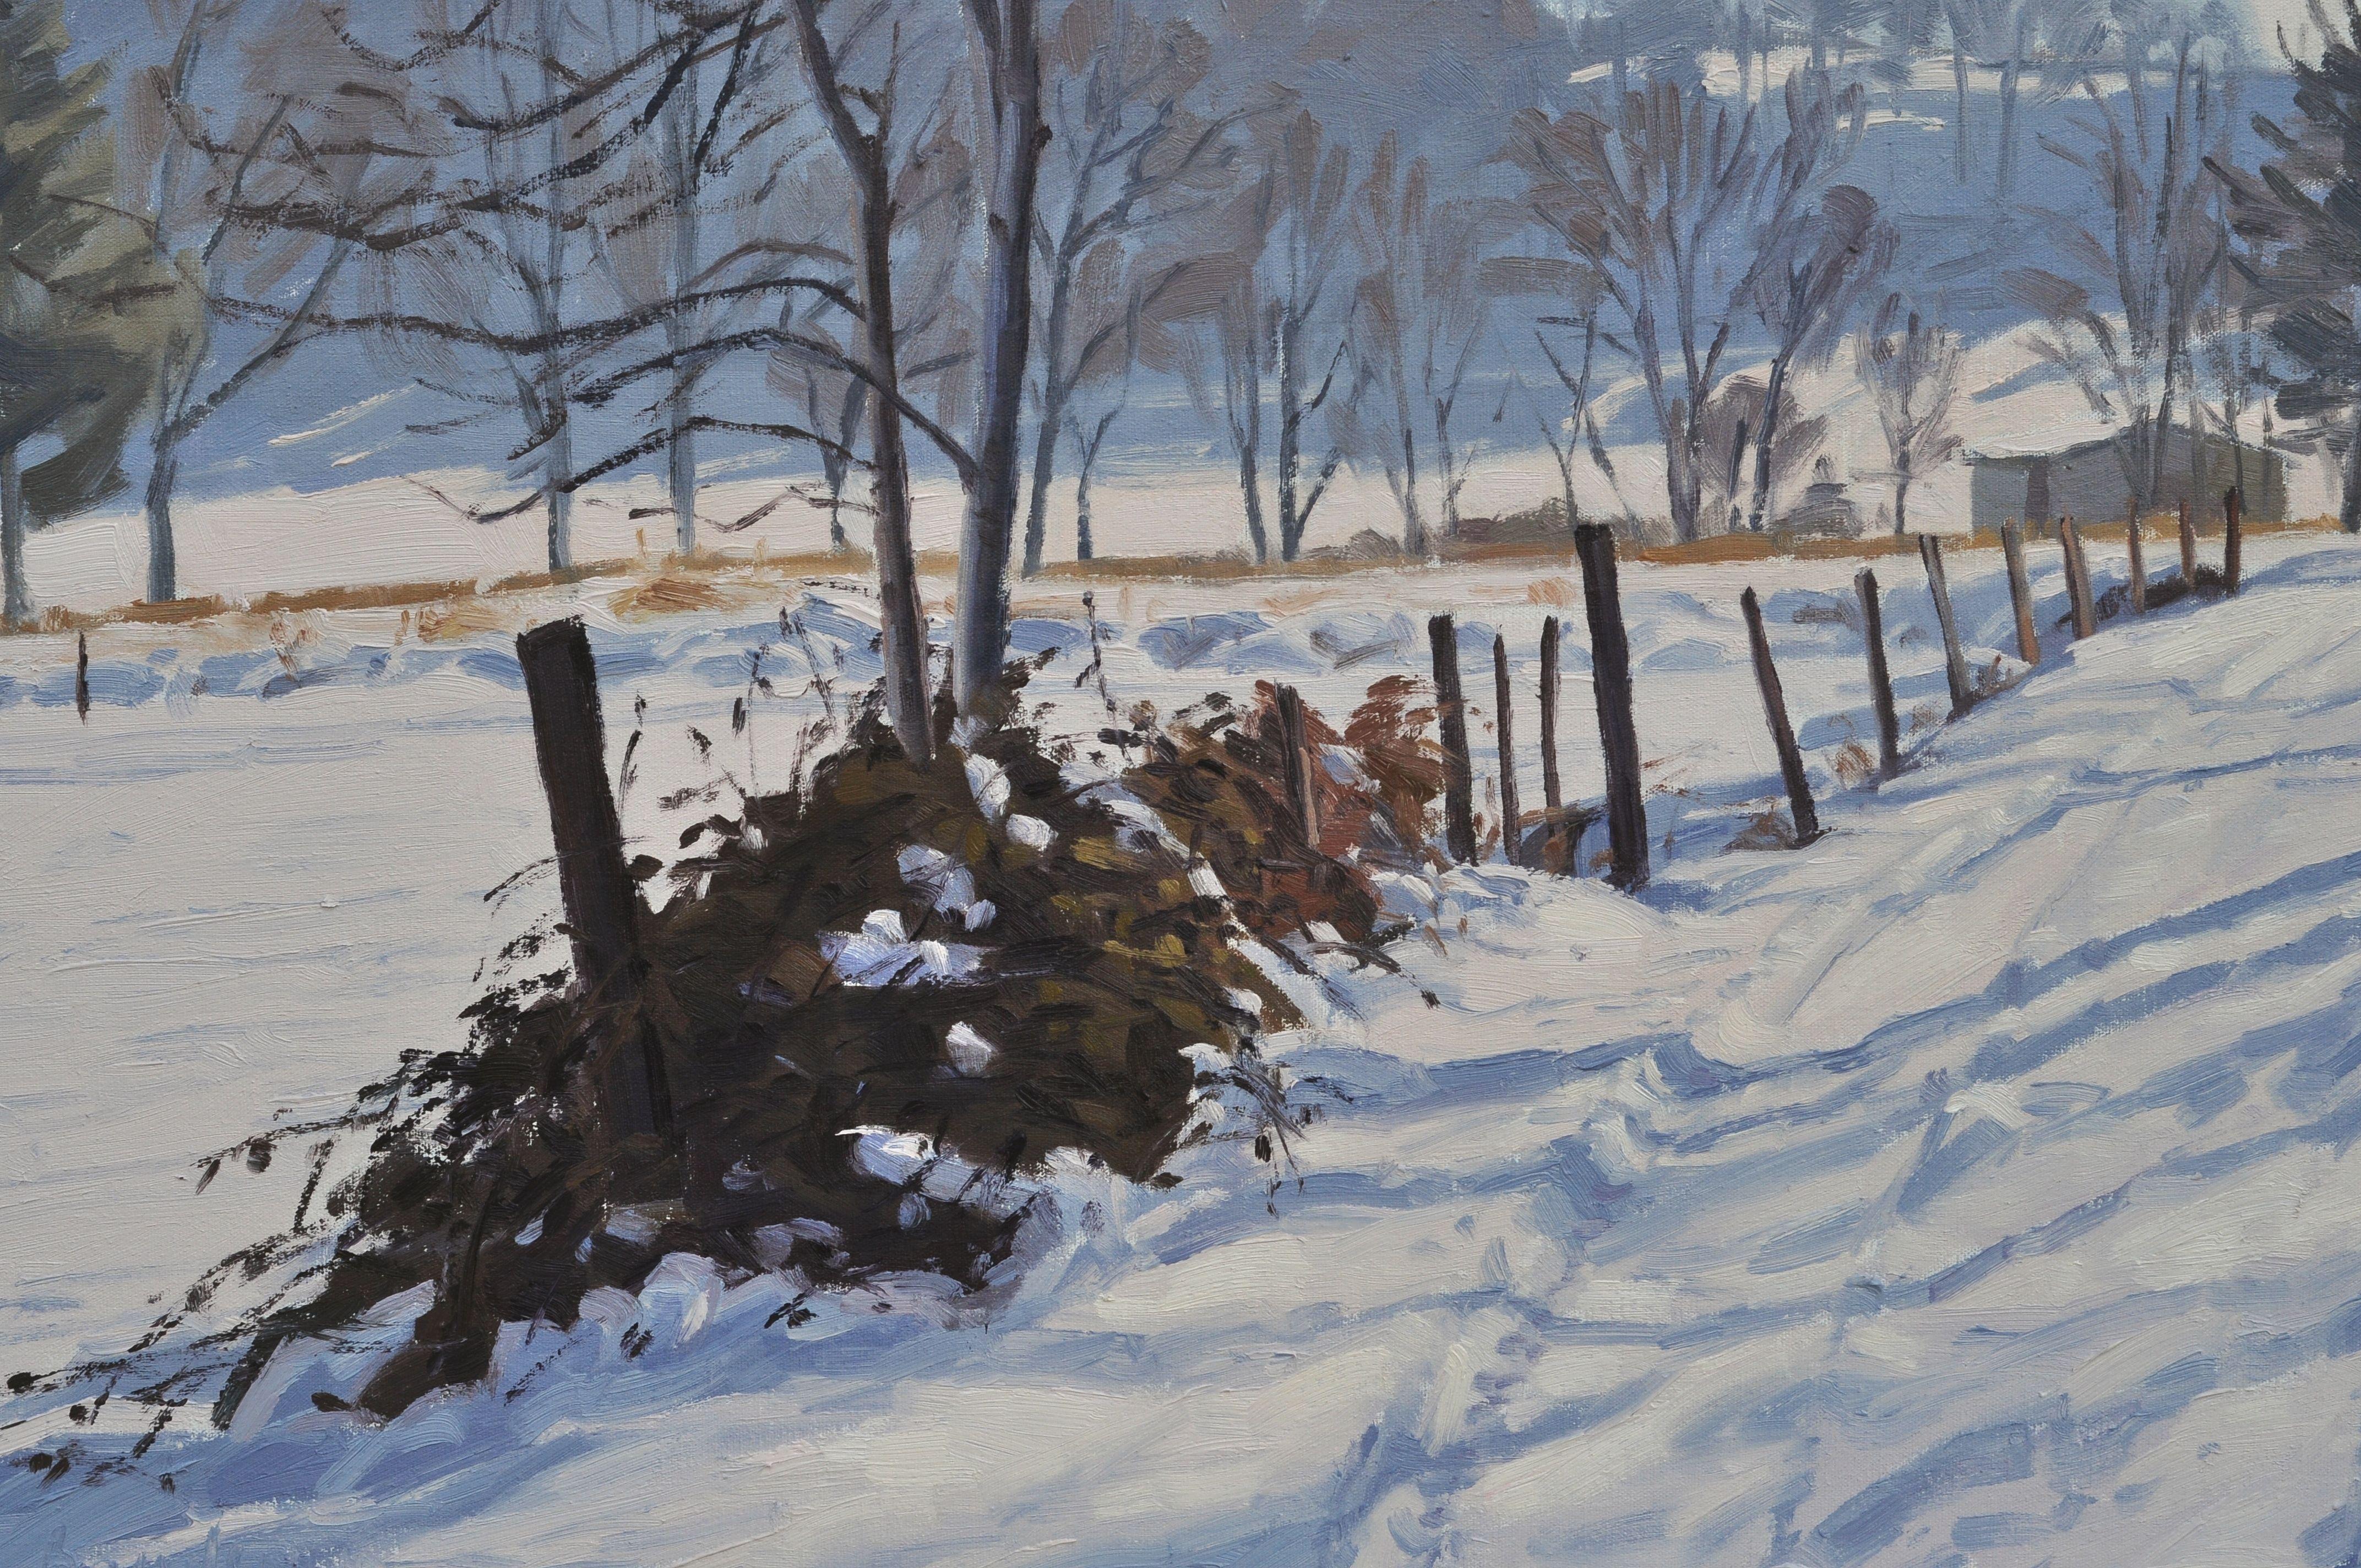 January 7, path in the snow at Saint Vincent, Painting, Oil on Canvas 2